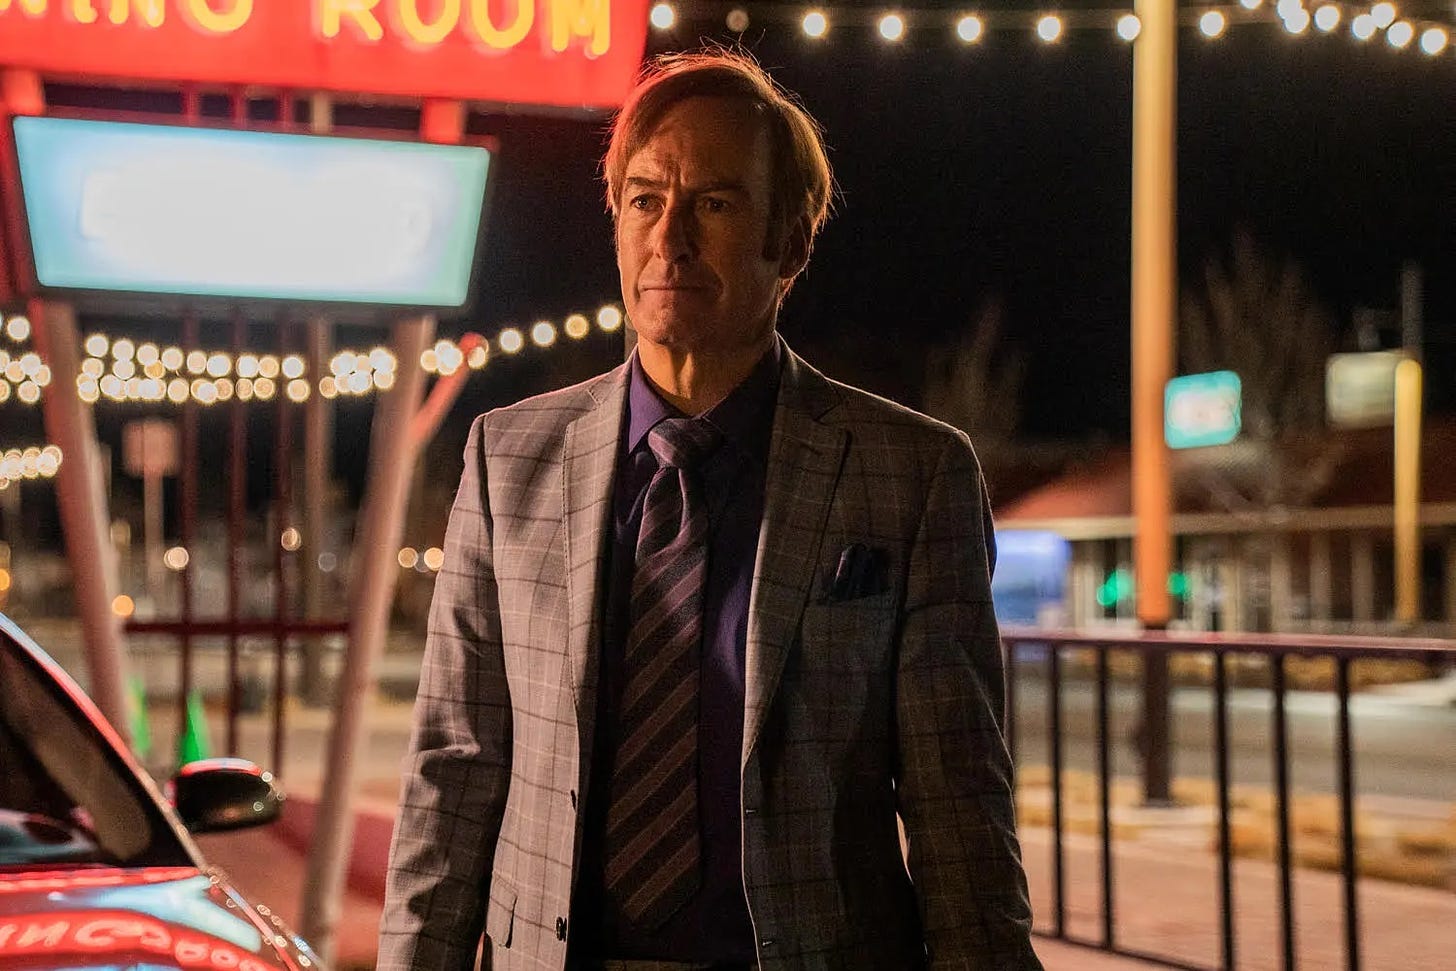 What's Going on in That Better Call Saul Season 6 Trailer? | Den of Geek